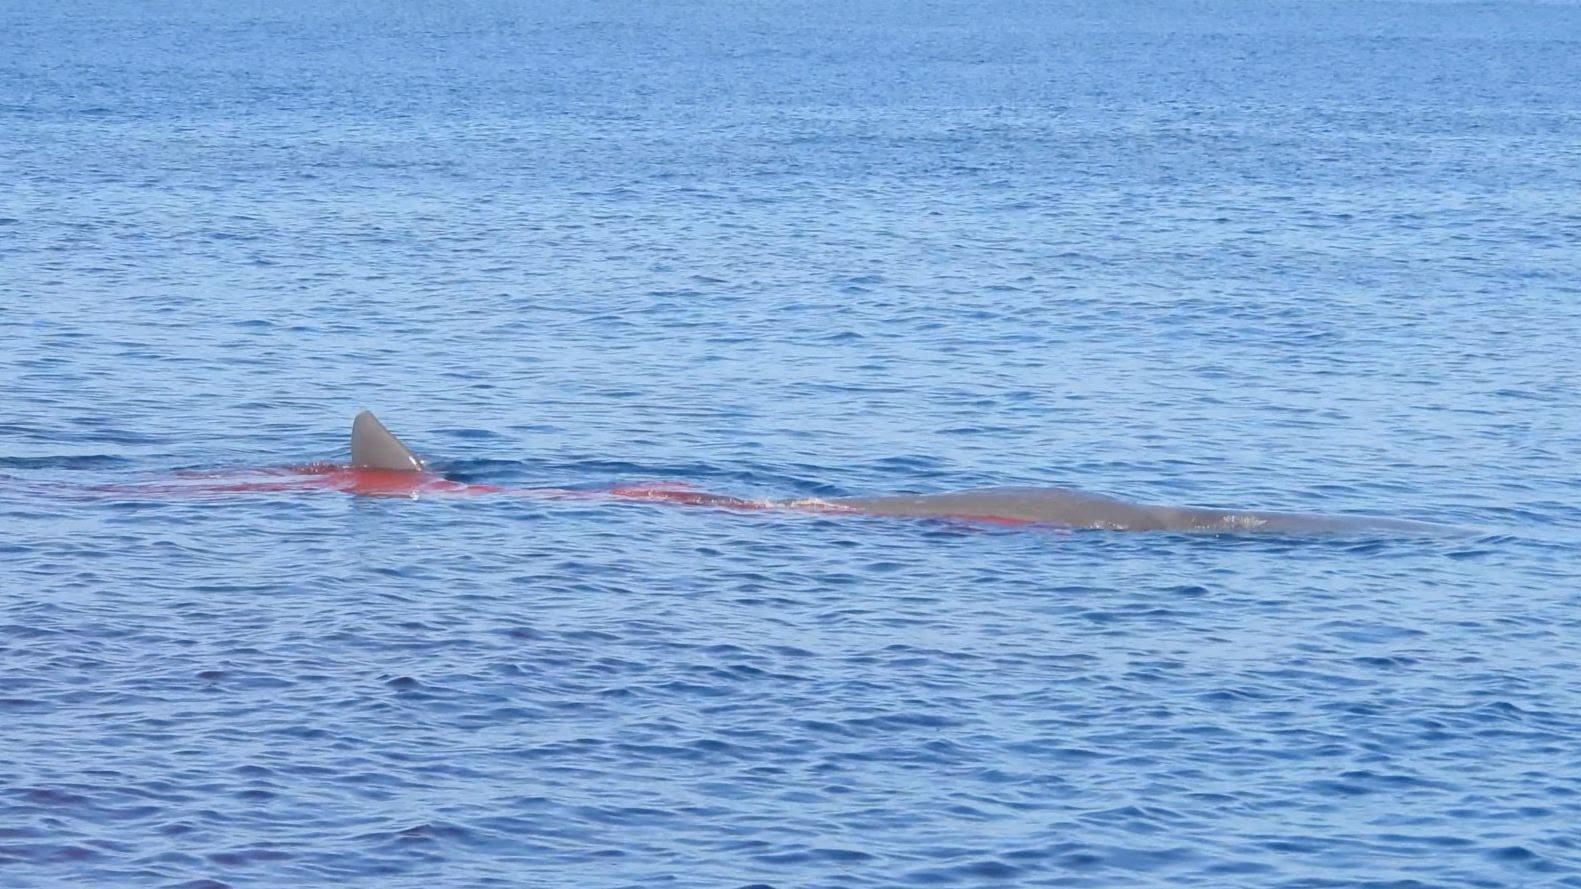 Sperm whale killed by ship in Strait of Gibraltar